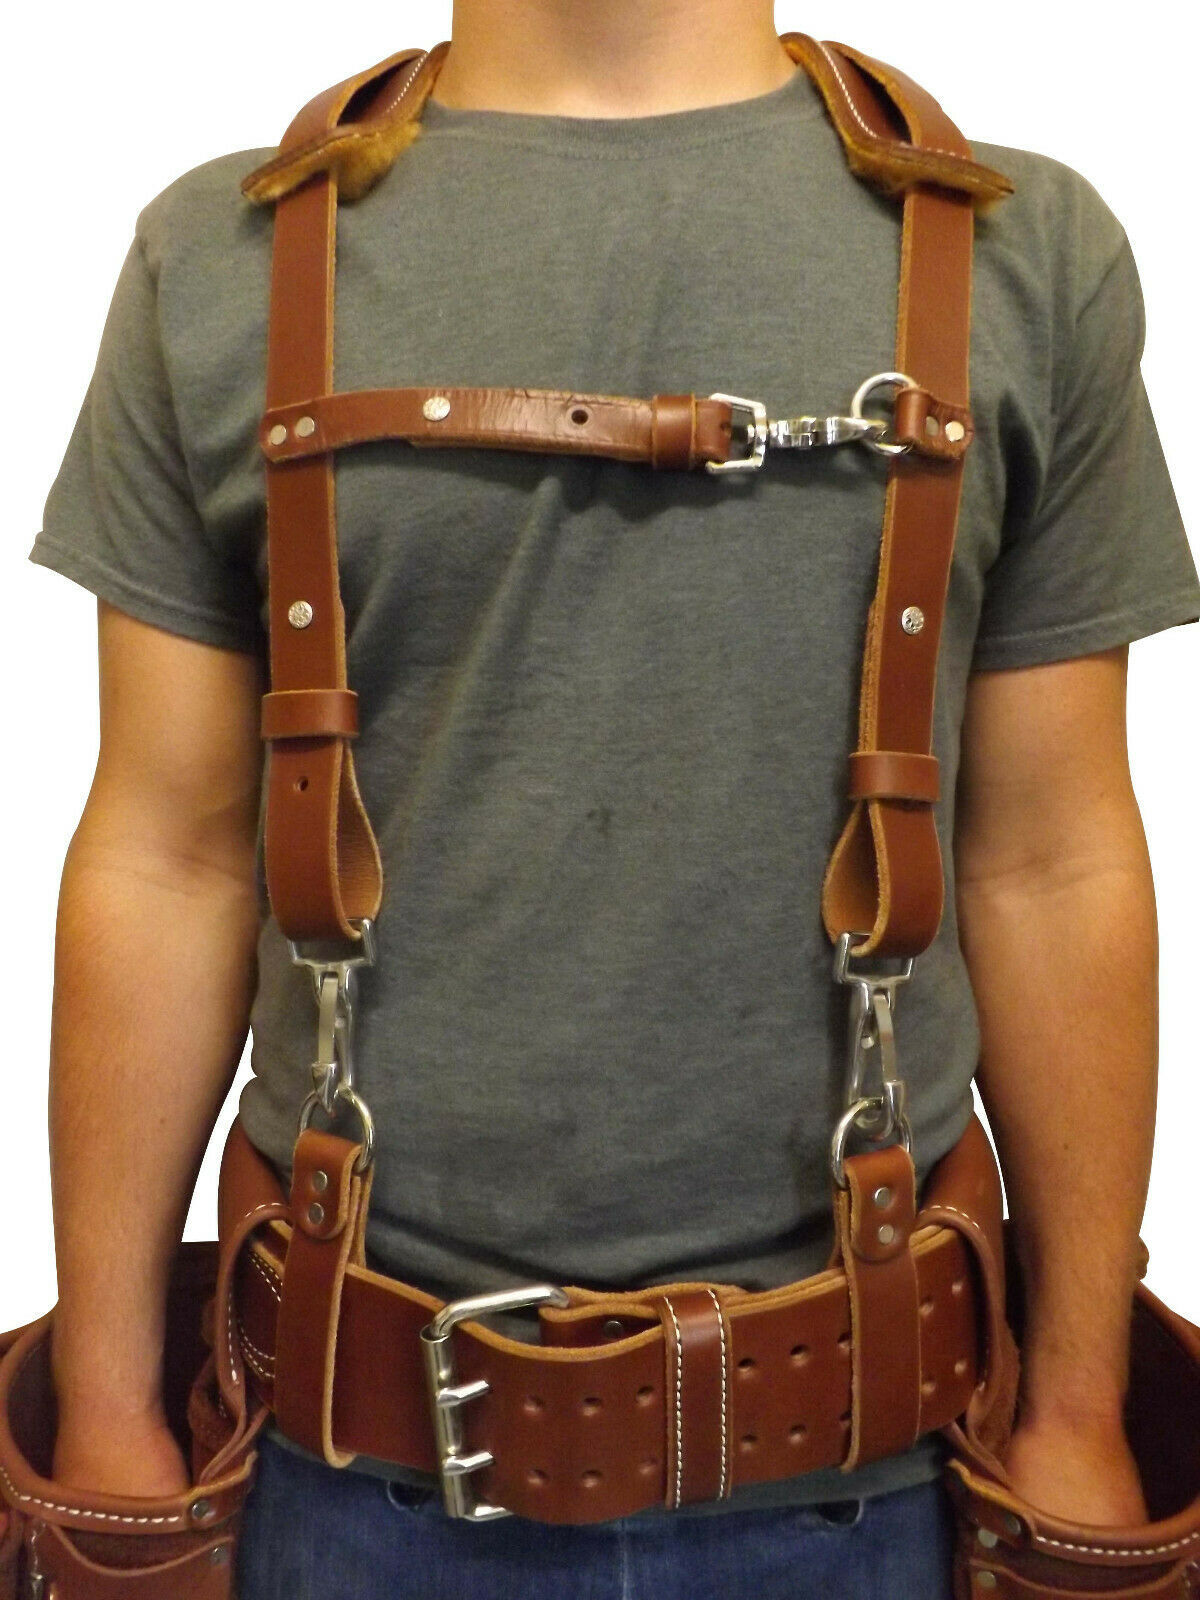 Primary image for LEATHER WORK SUSPENDERS - Amish Construction Belt & Back Support USA HANDMADE